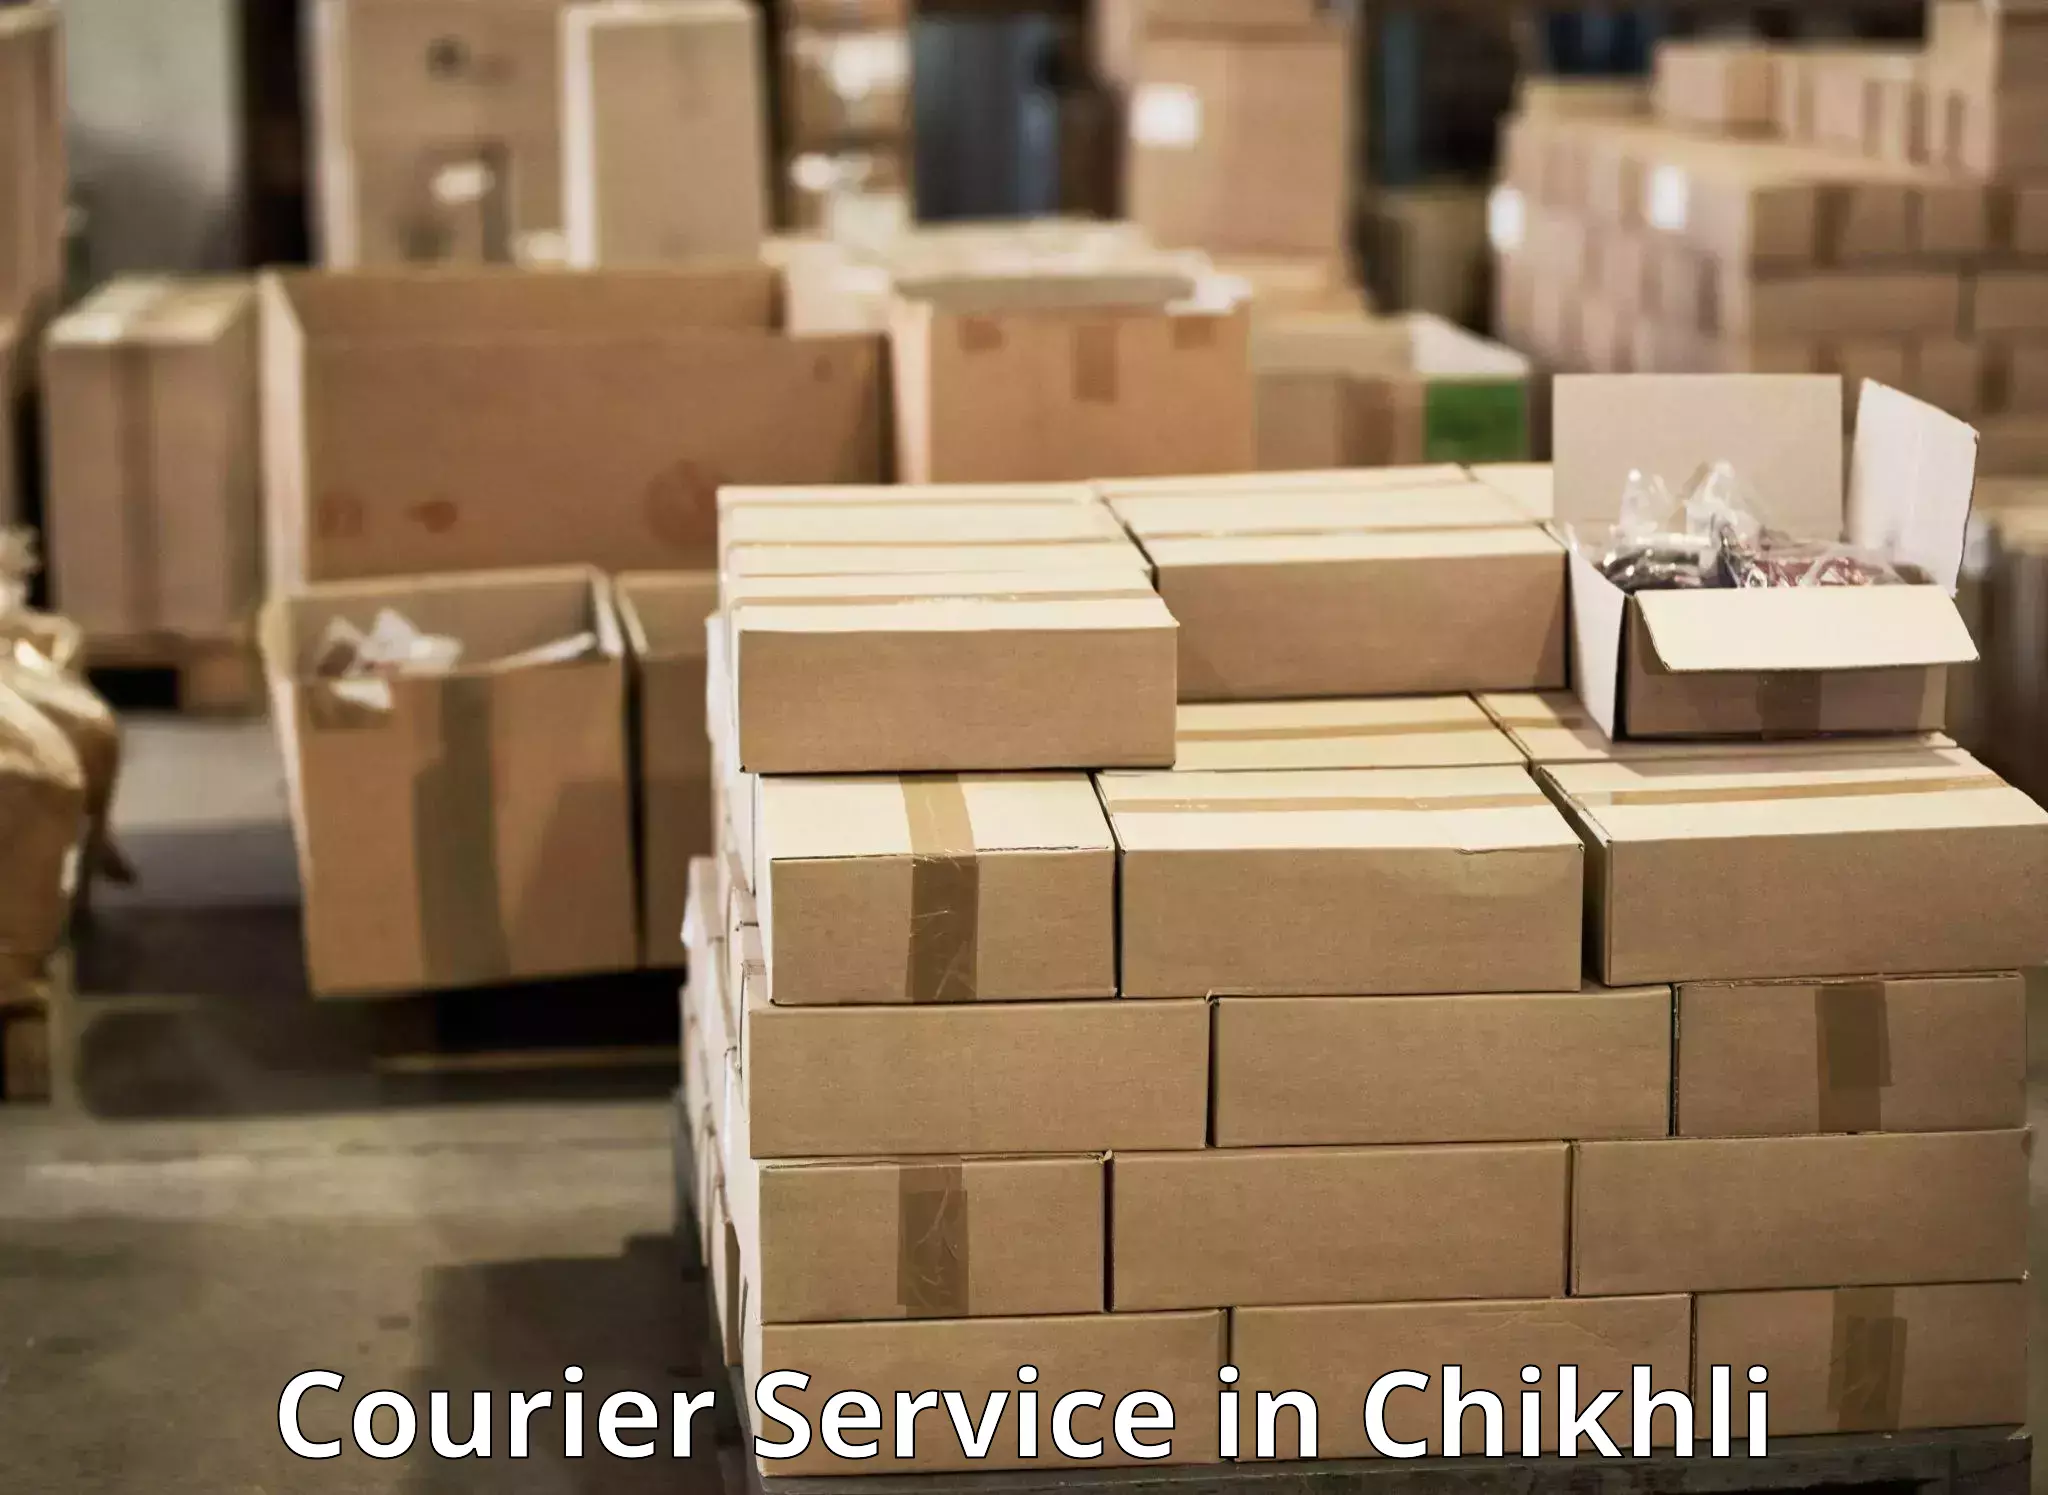 24-hour courier service in Chikhli